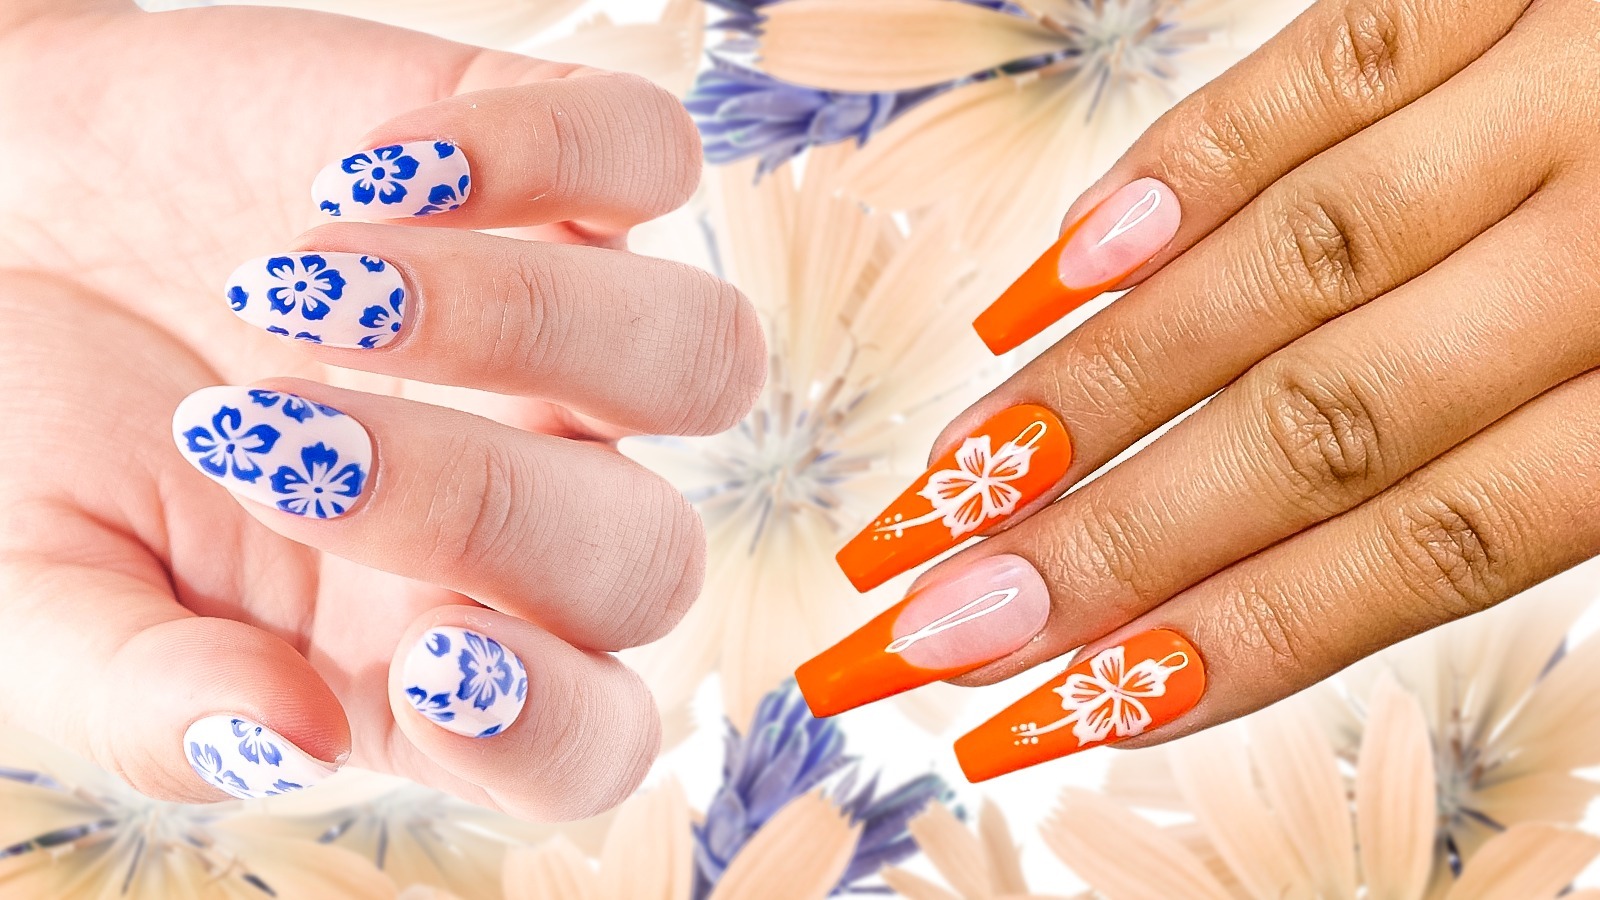 how to do nail art designs for beginners at home